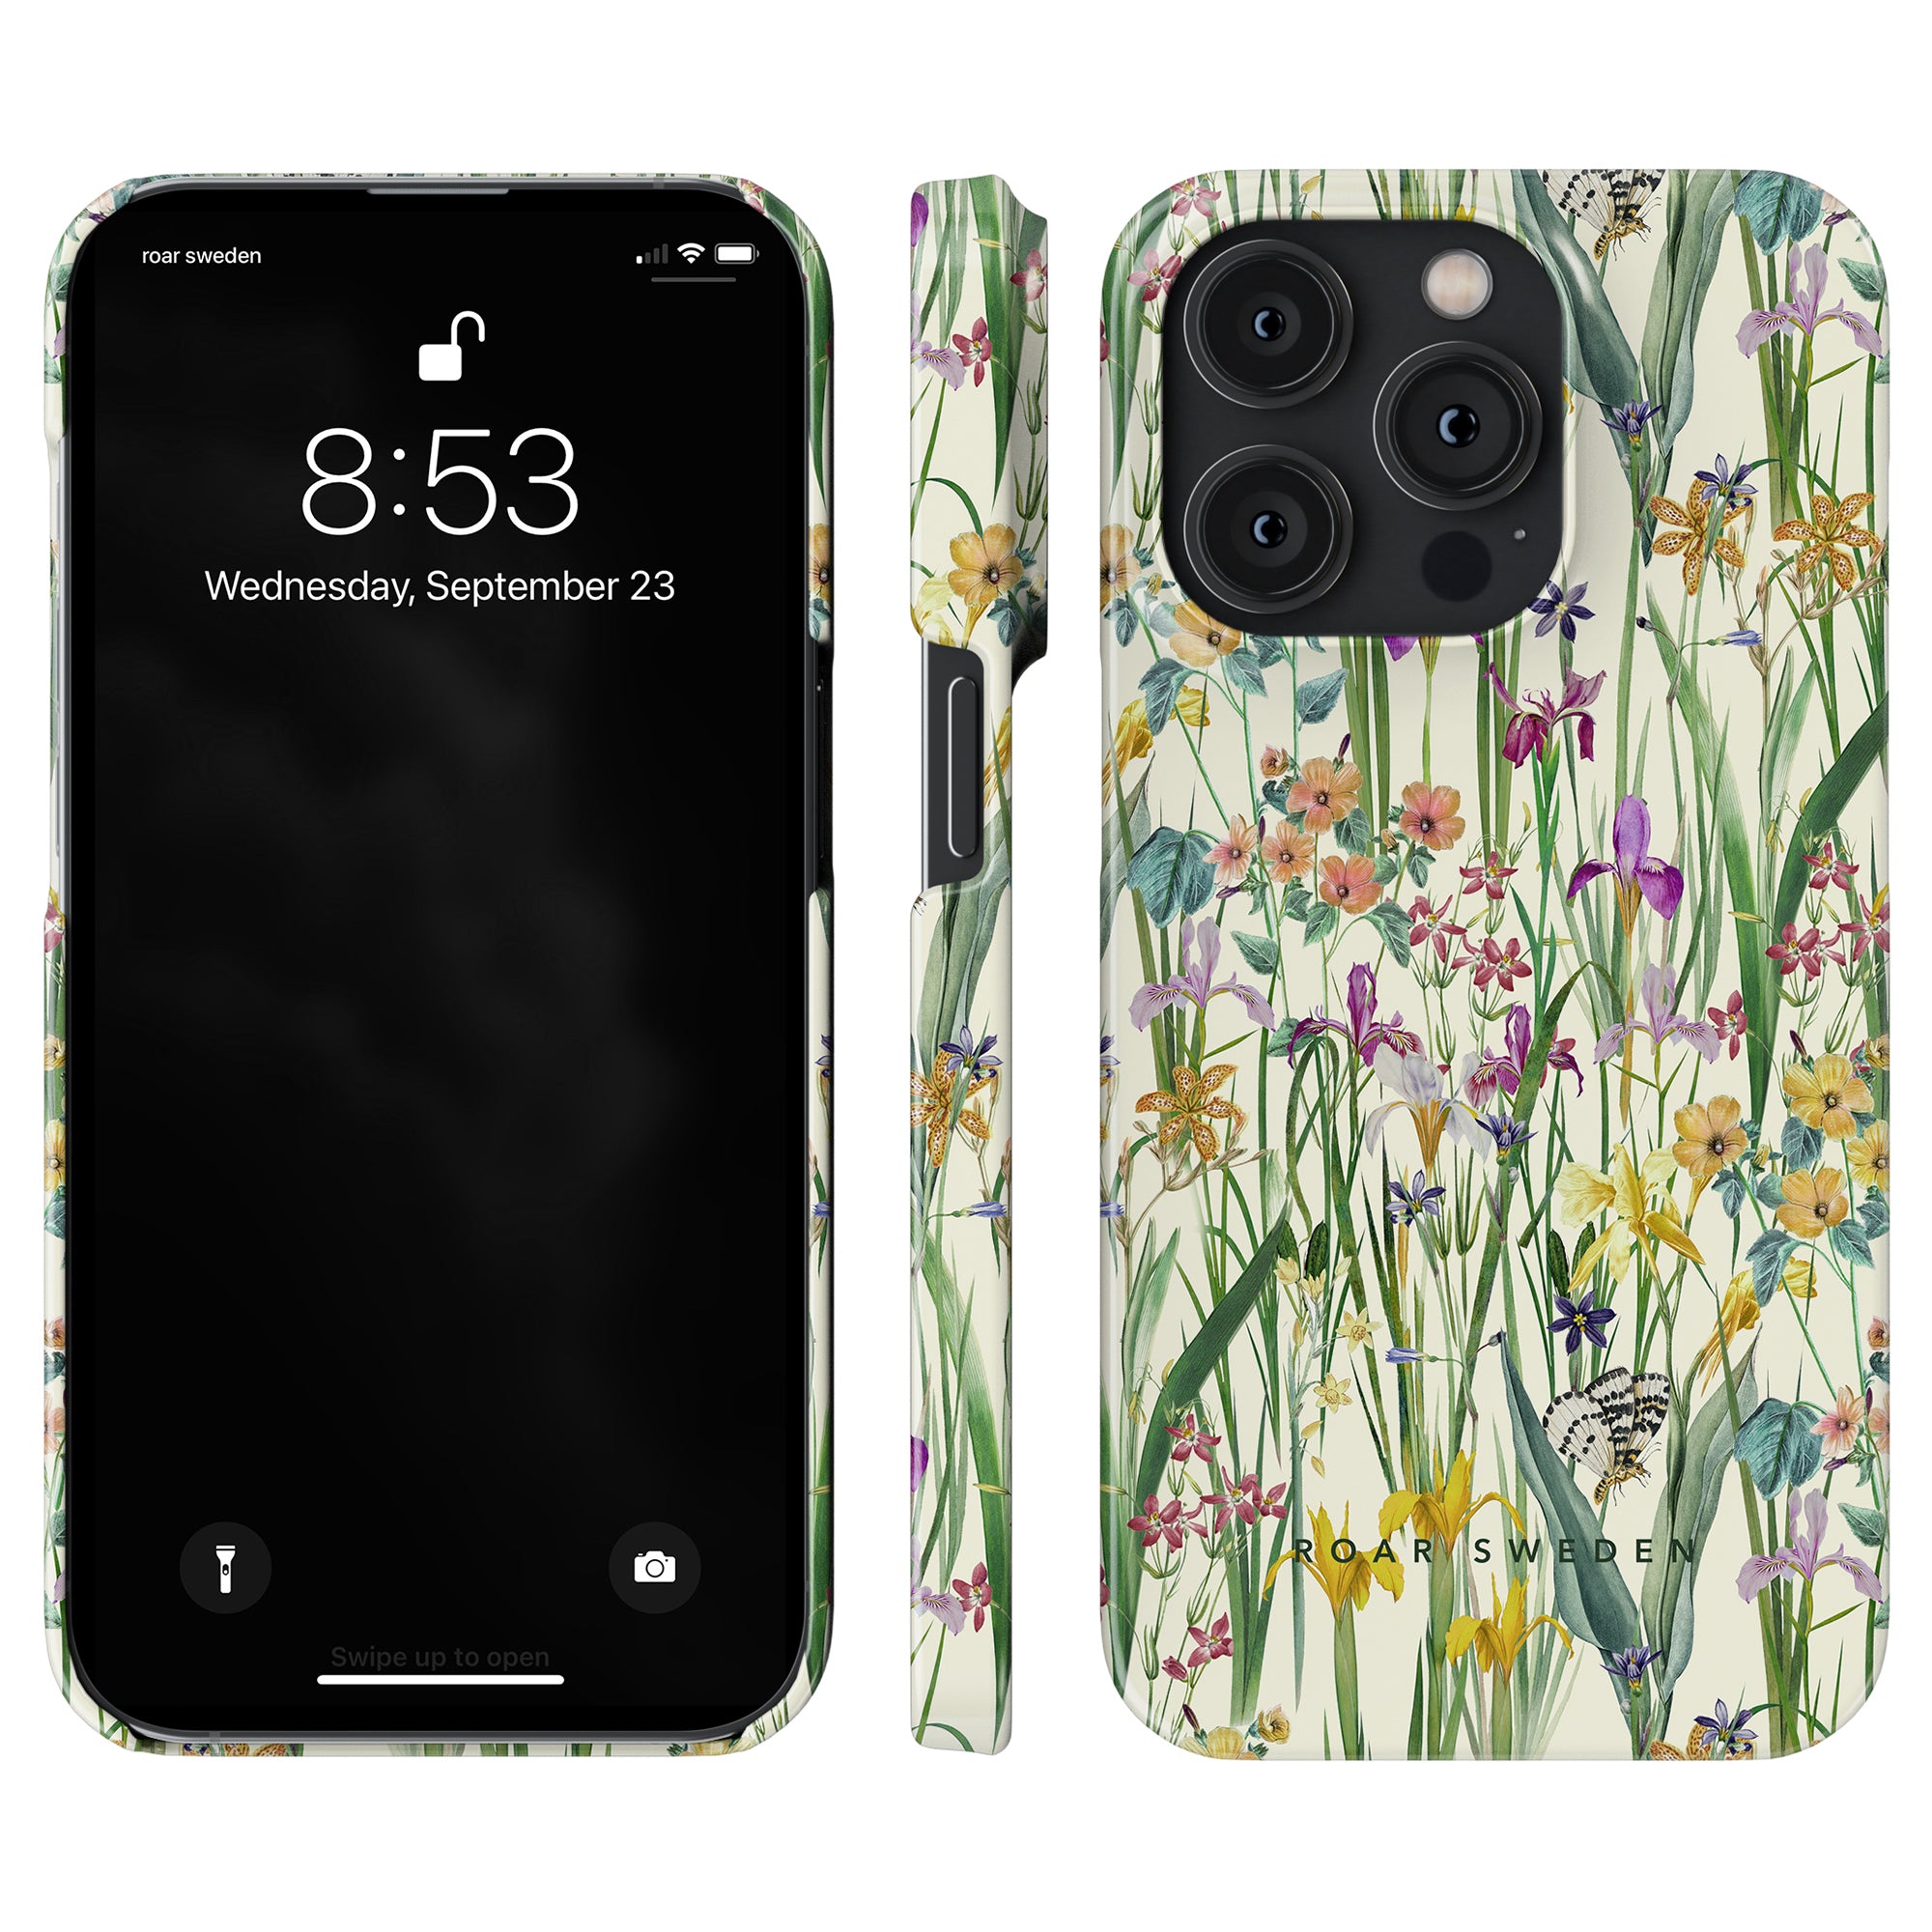 A smartphone with a Blooming Meadow - Slim case displaying the lock screen with the time and date sits next to a moisturizer.